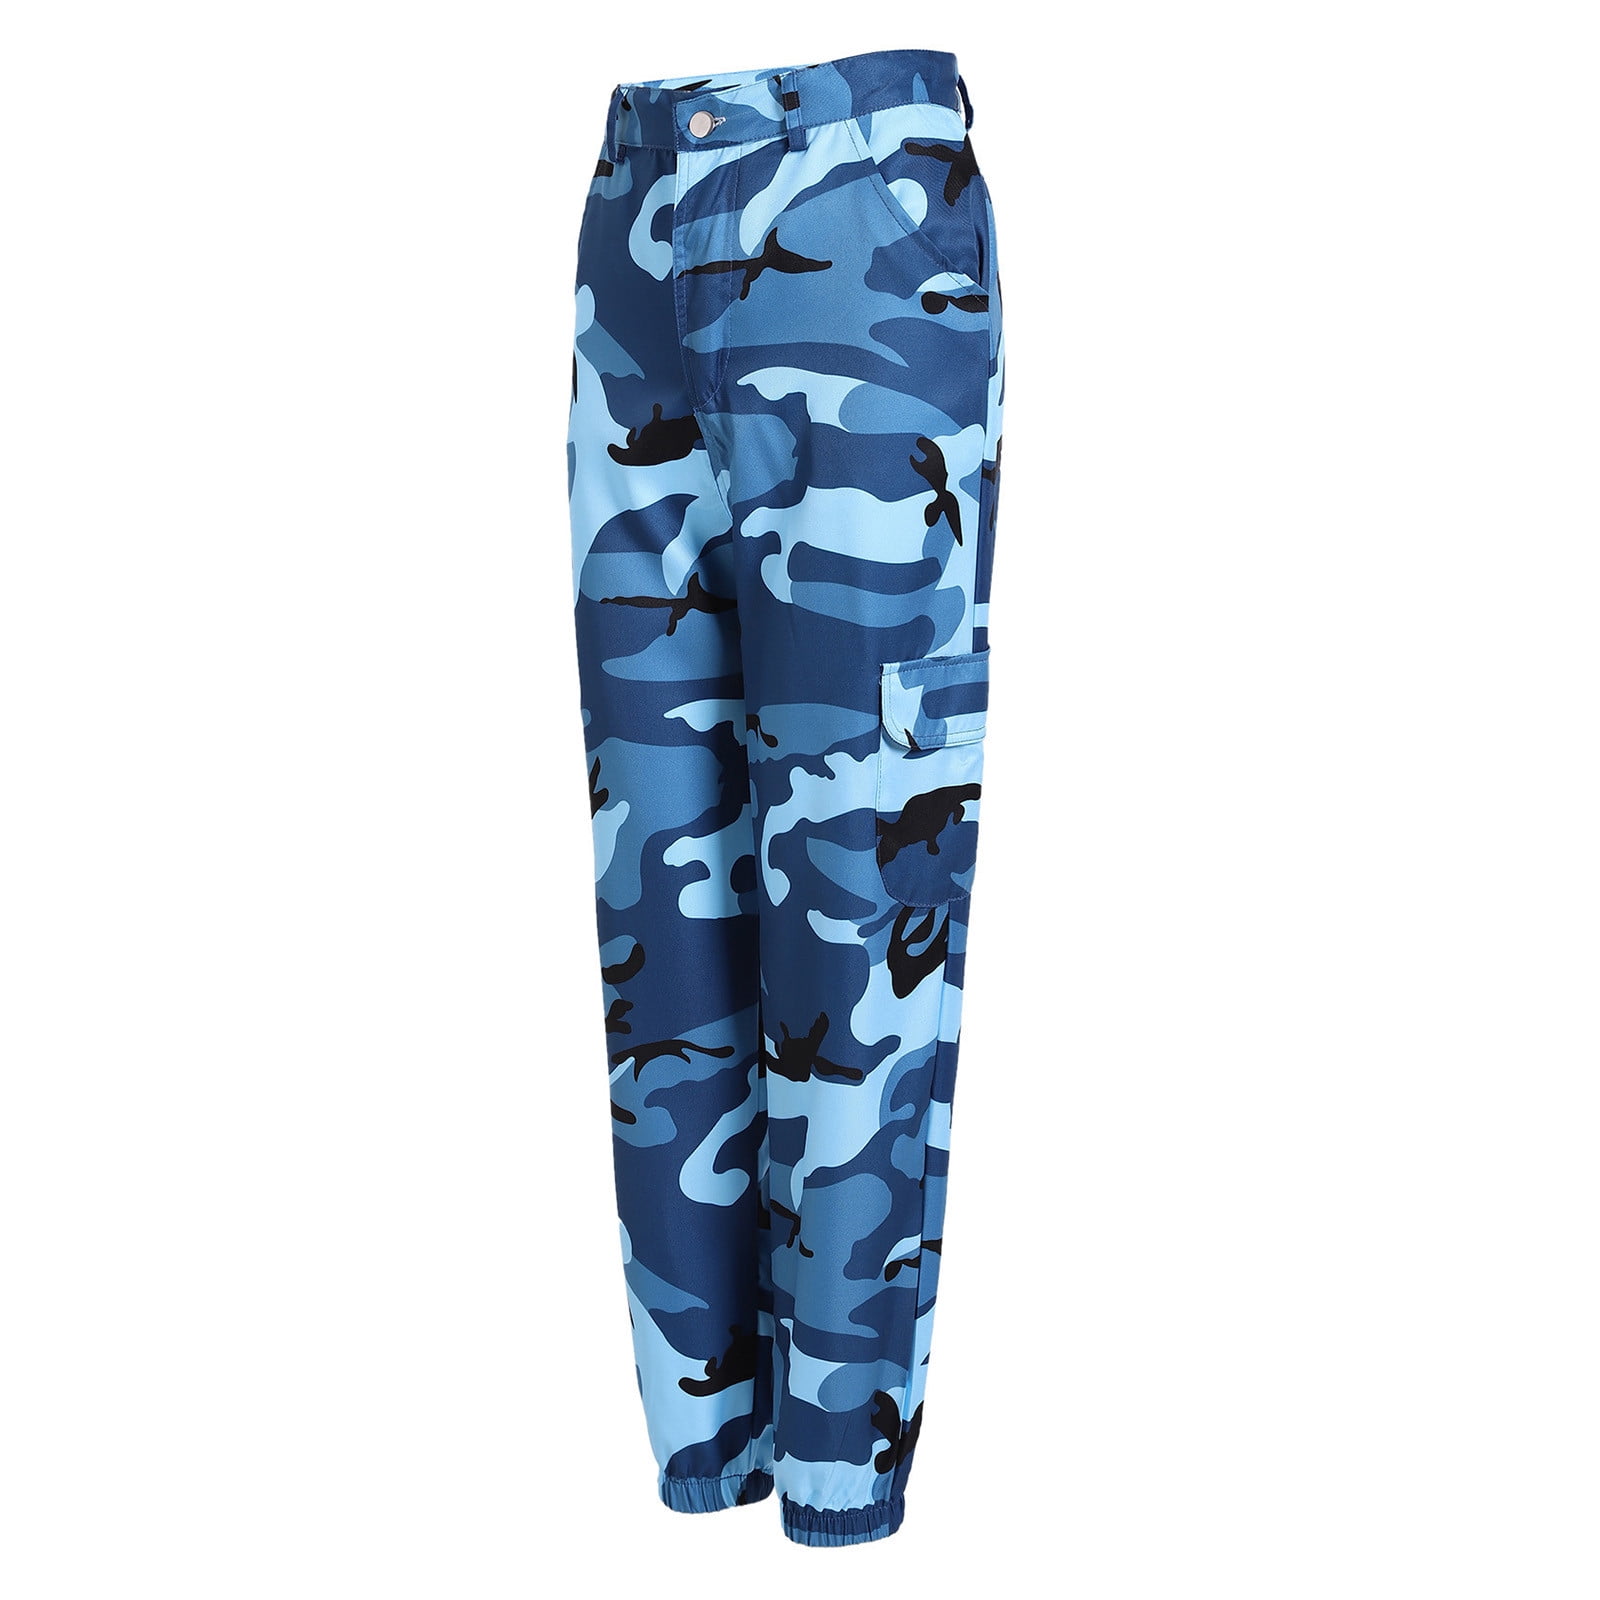 Messy Marines Navy Blue Camo Hoppers  Unisex Pants  for All Ocassions   Amazonin Clothing  Accessories